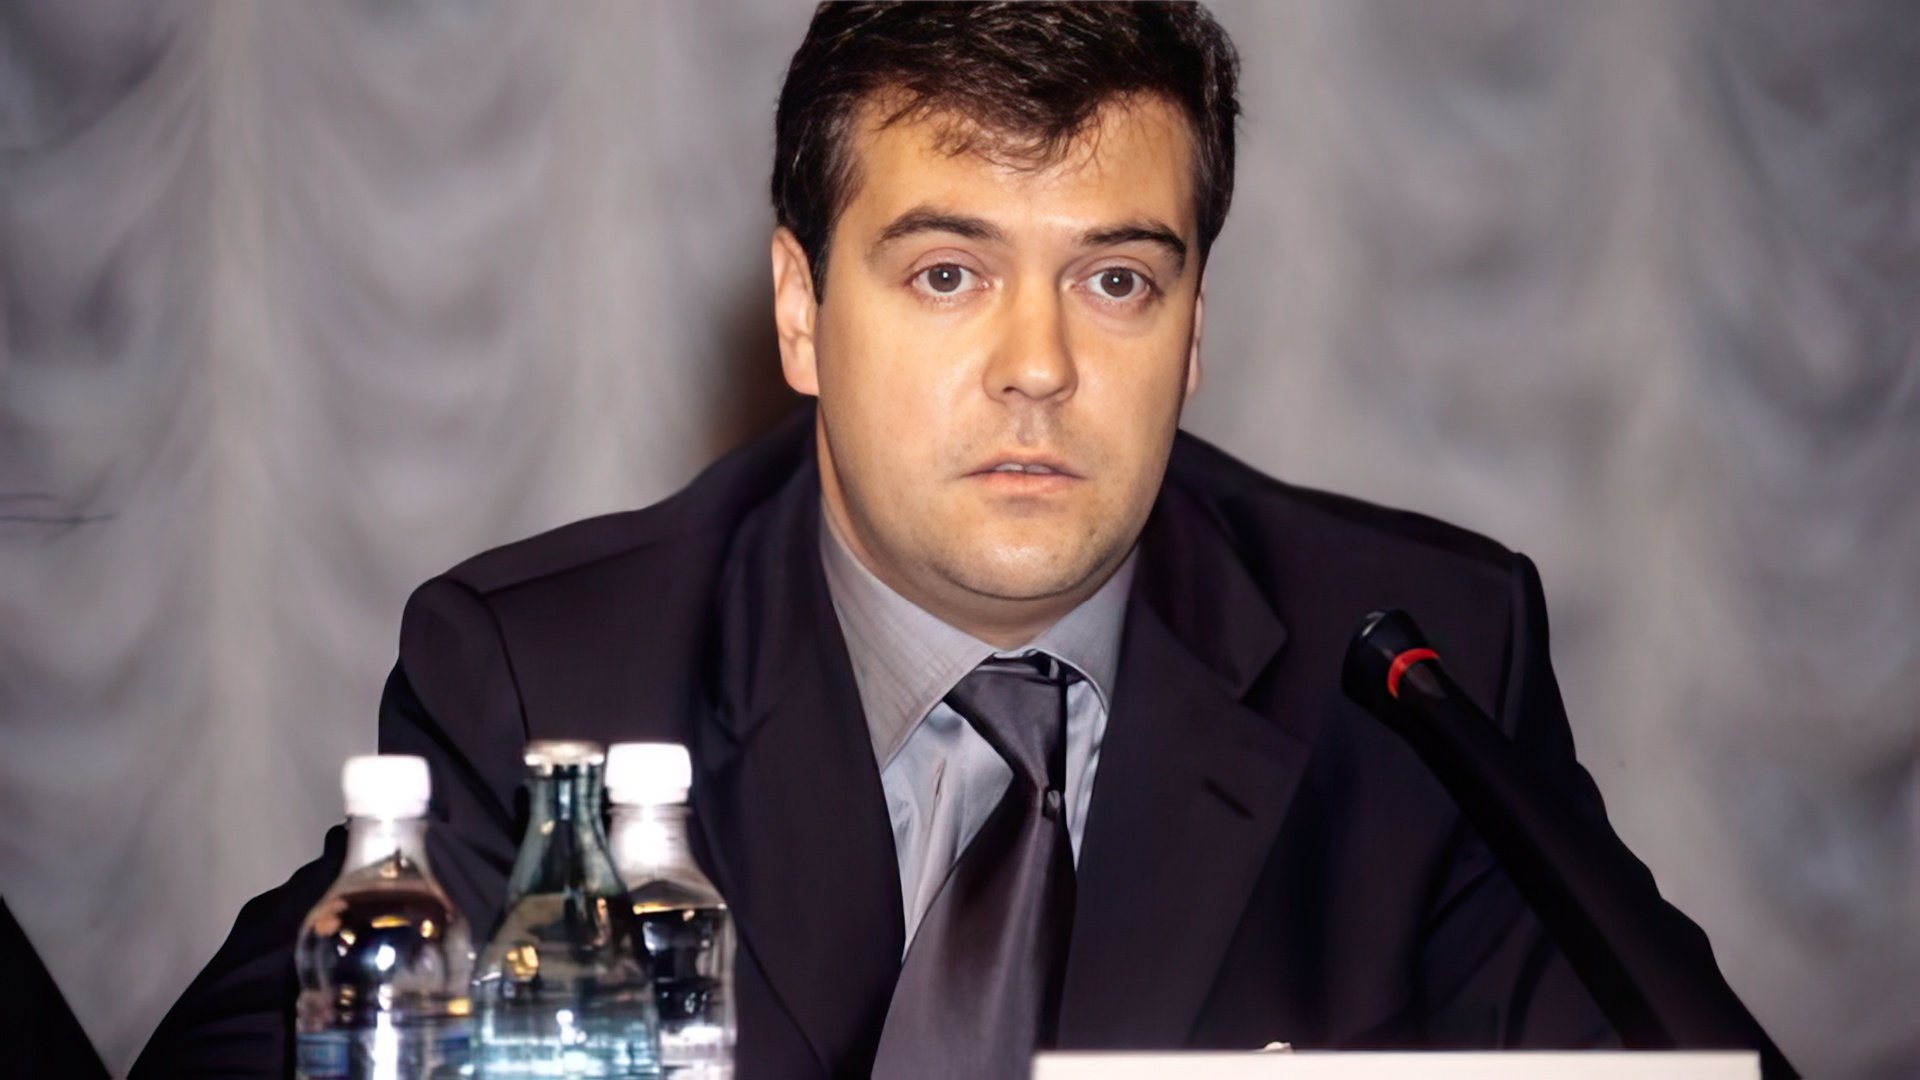 Dmitry Medvedev as a First Deputy Head of the Presidential Administration, in 2000